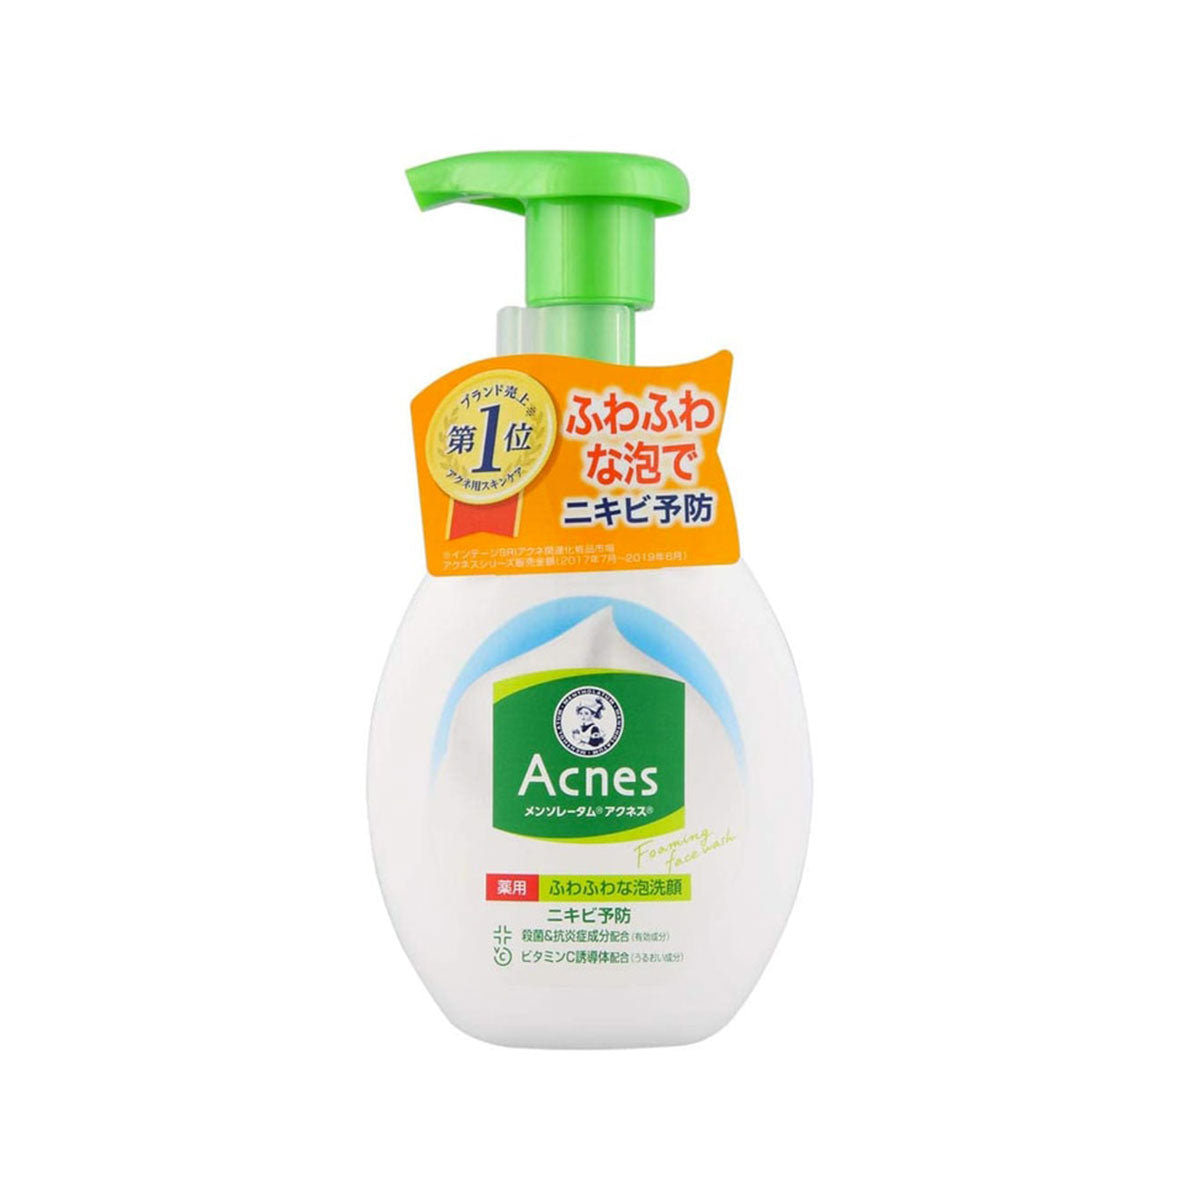 Acnes Medicated Viamine Face Wash Foam Cleanser 160ml